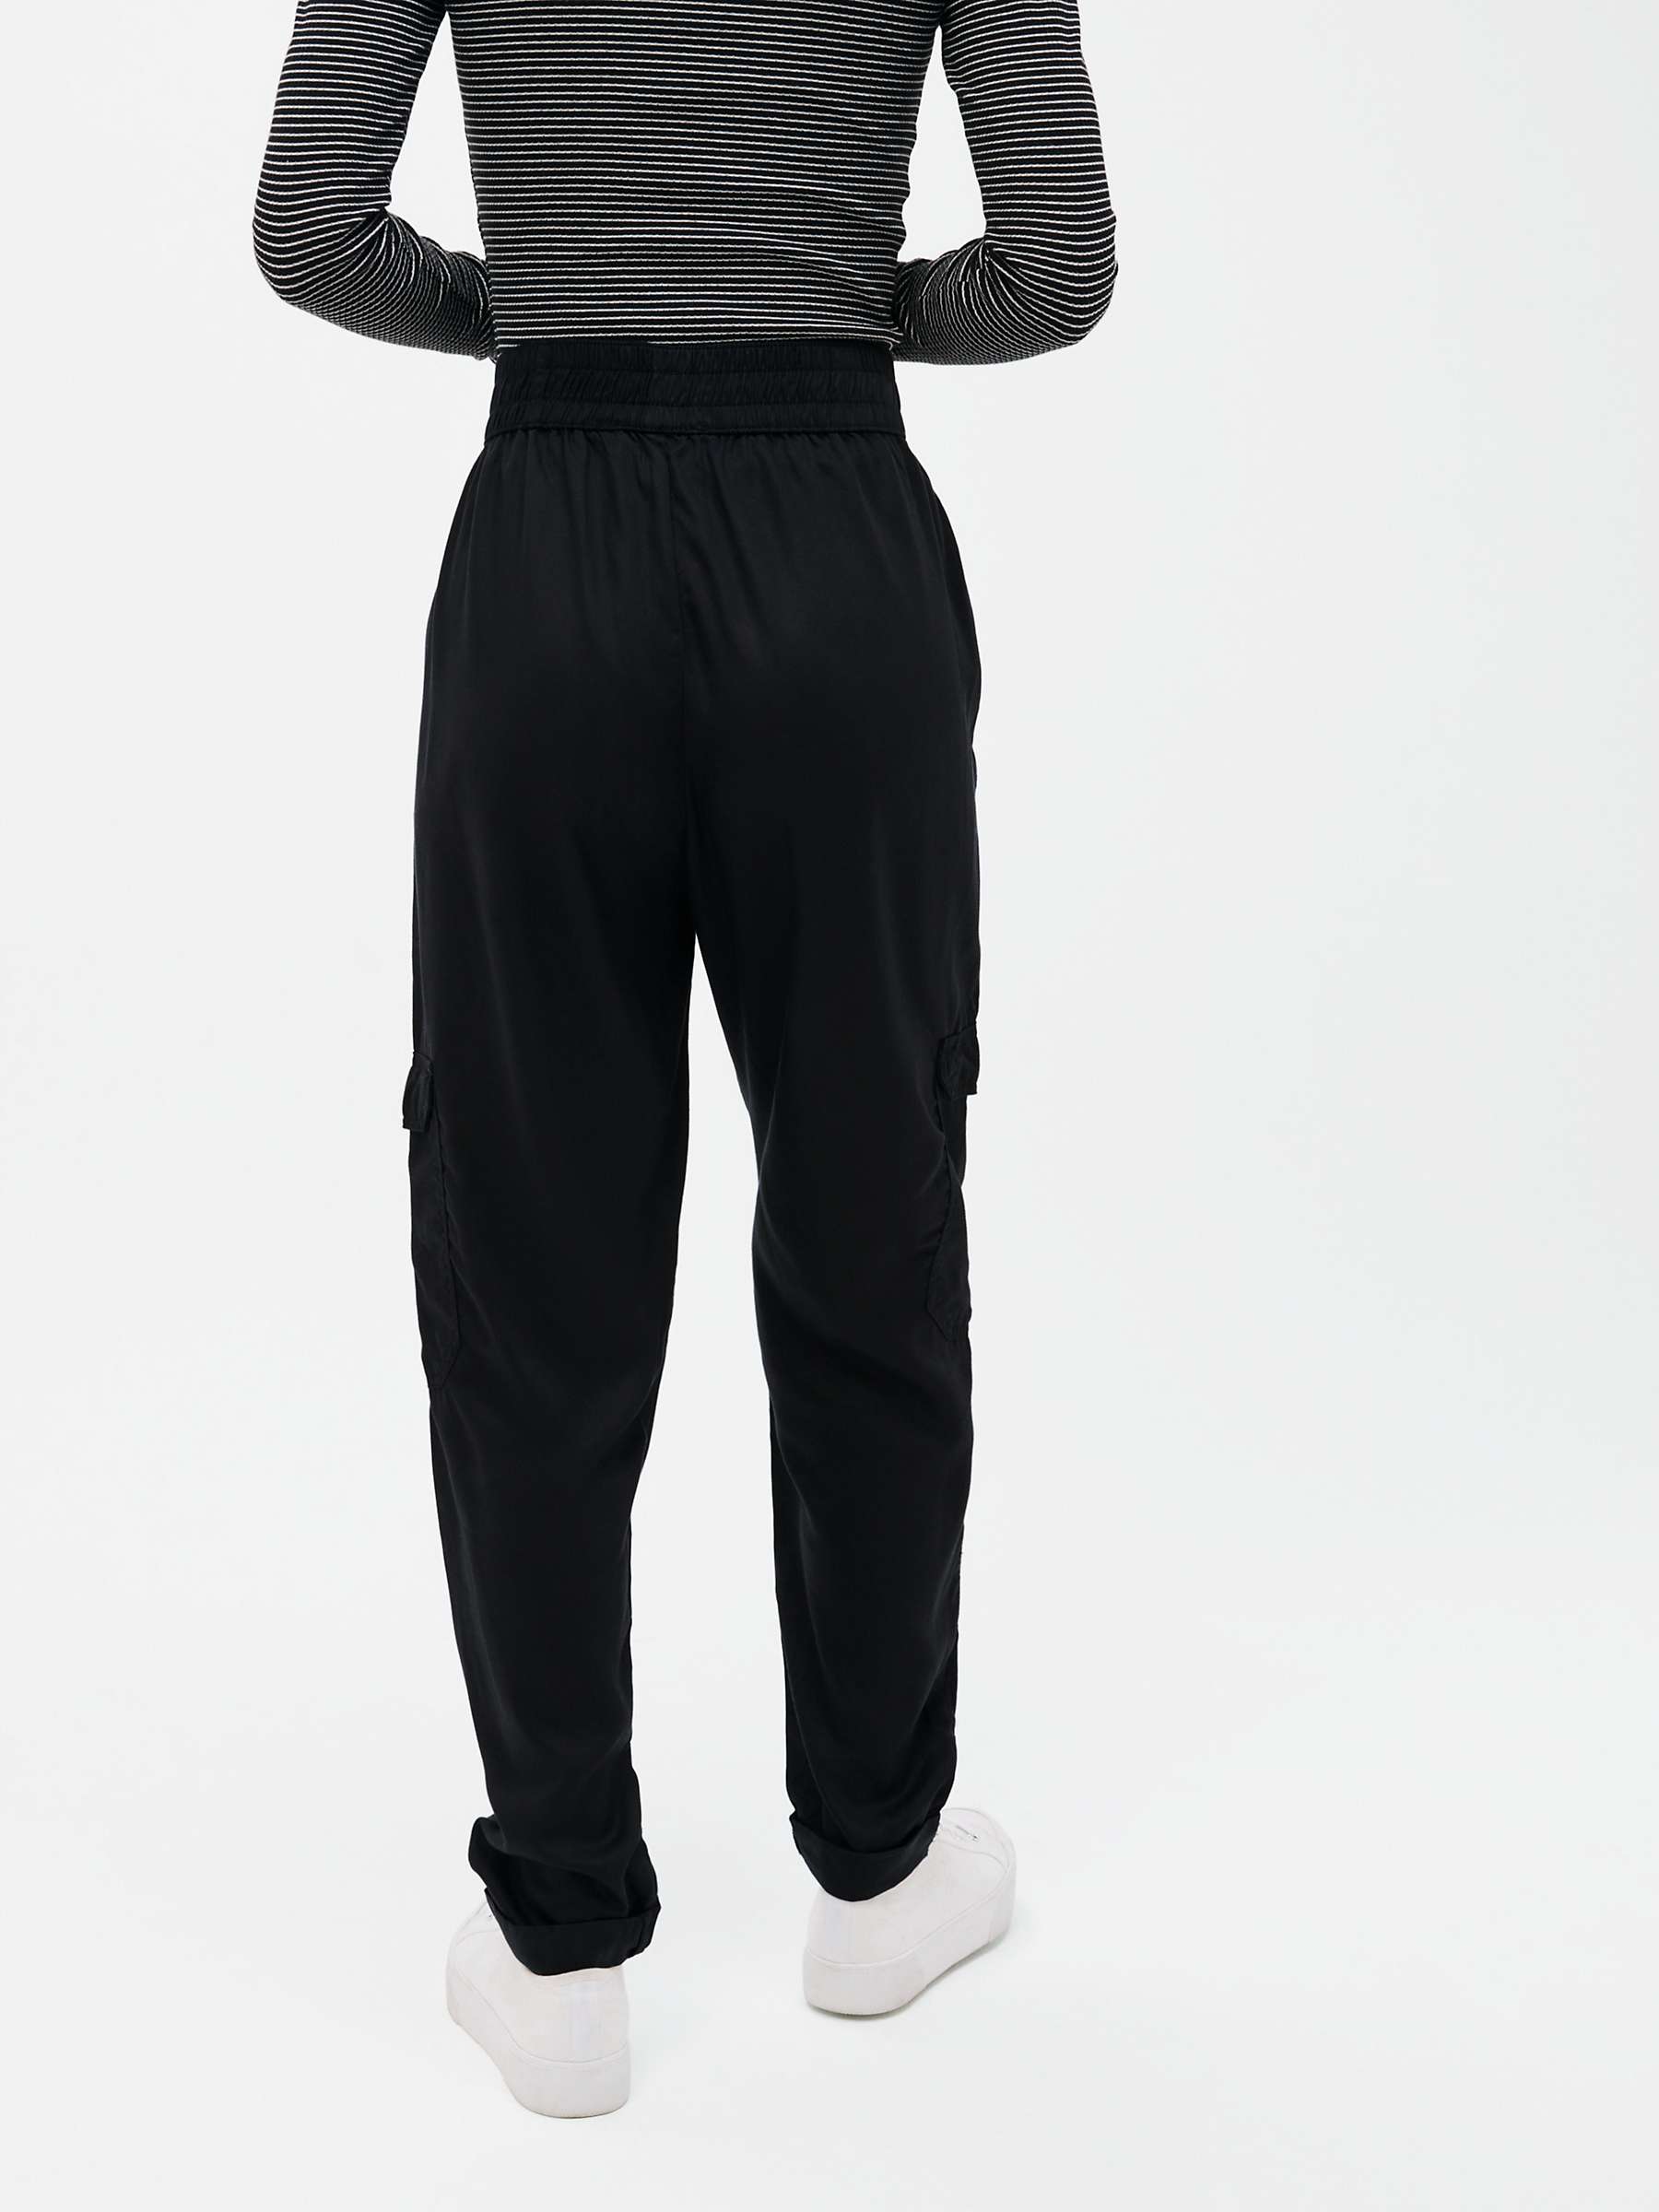 Buy John Lewis ANYDAY Plain Cargo Pocket Turn Up Trousers Online at johnlewis.com